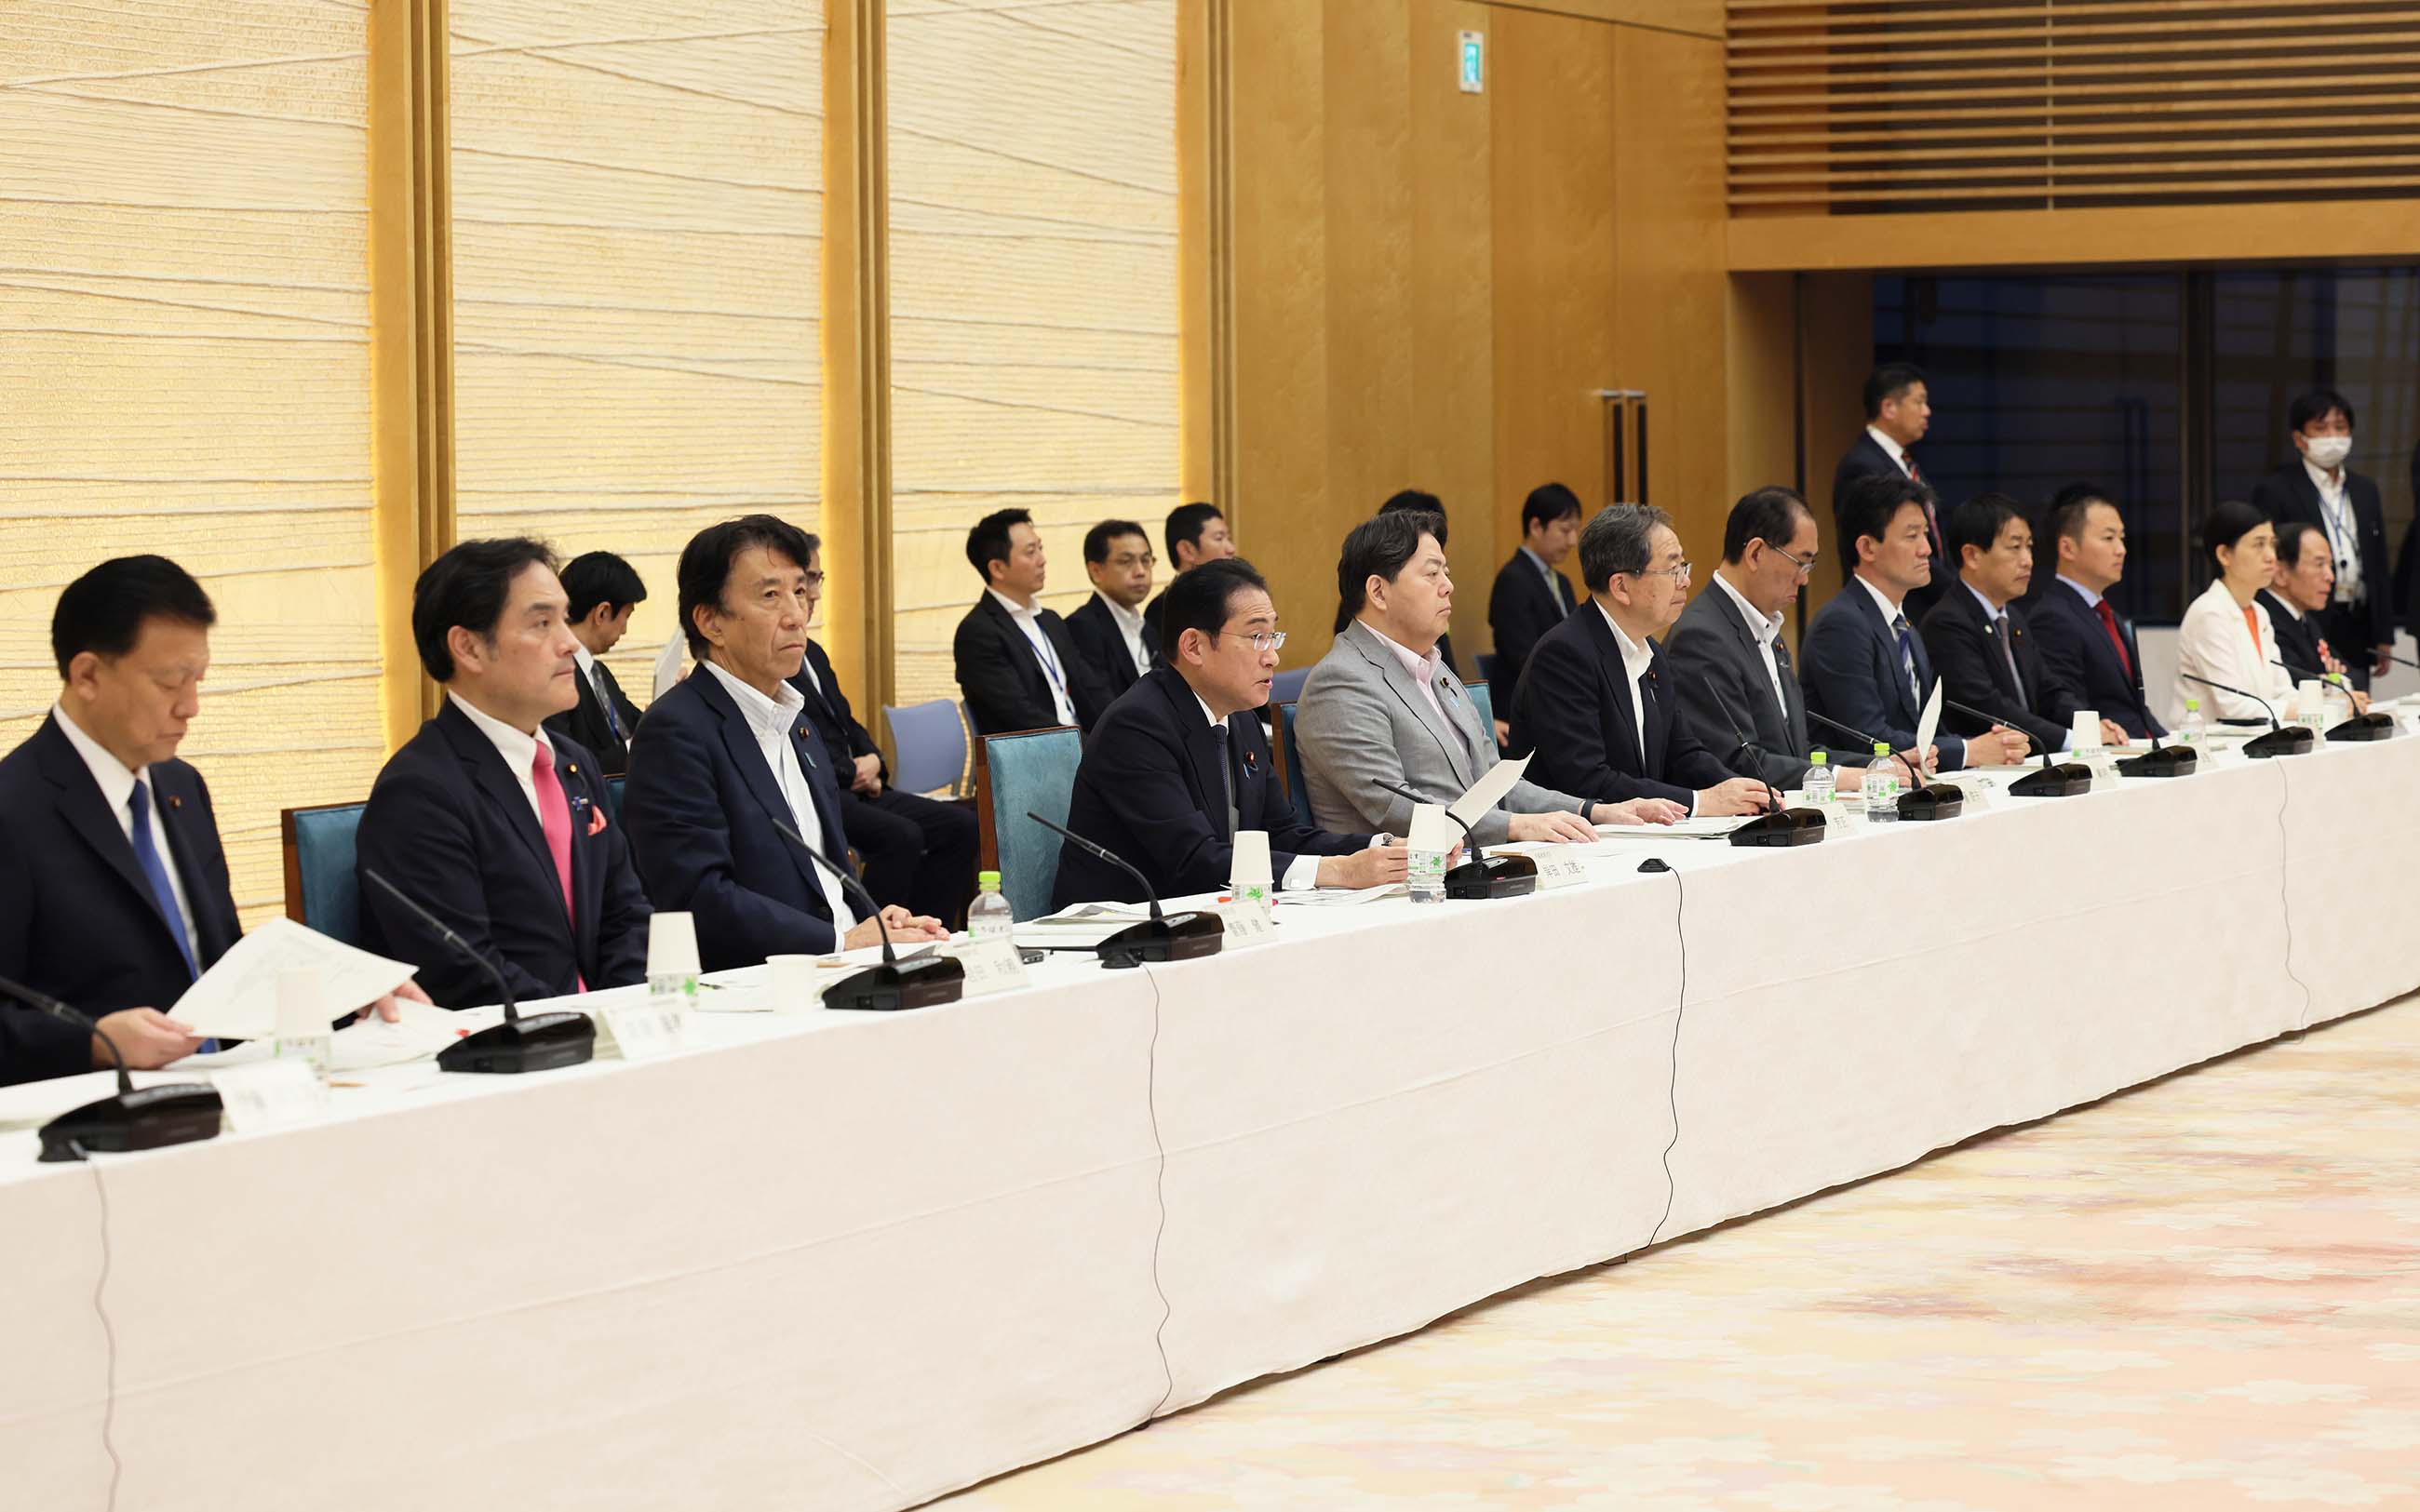 Prime Minister Kishida wrapping up a meeting (6)